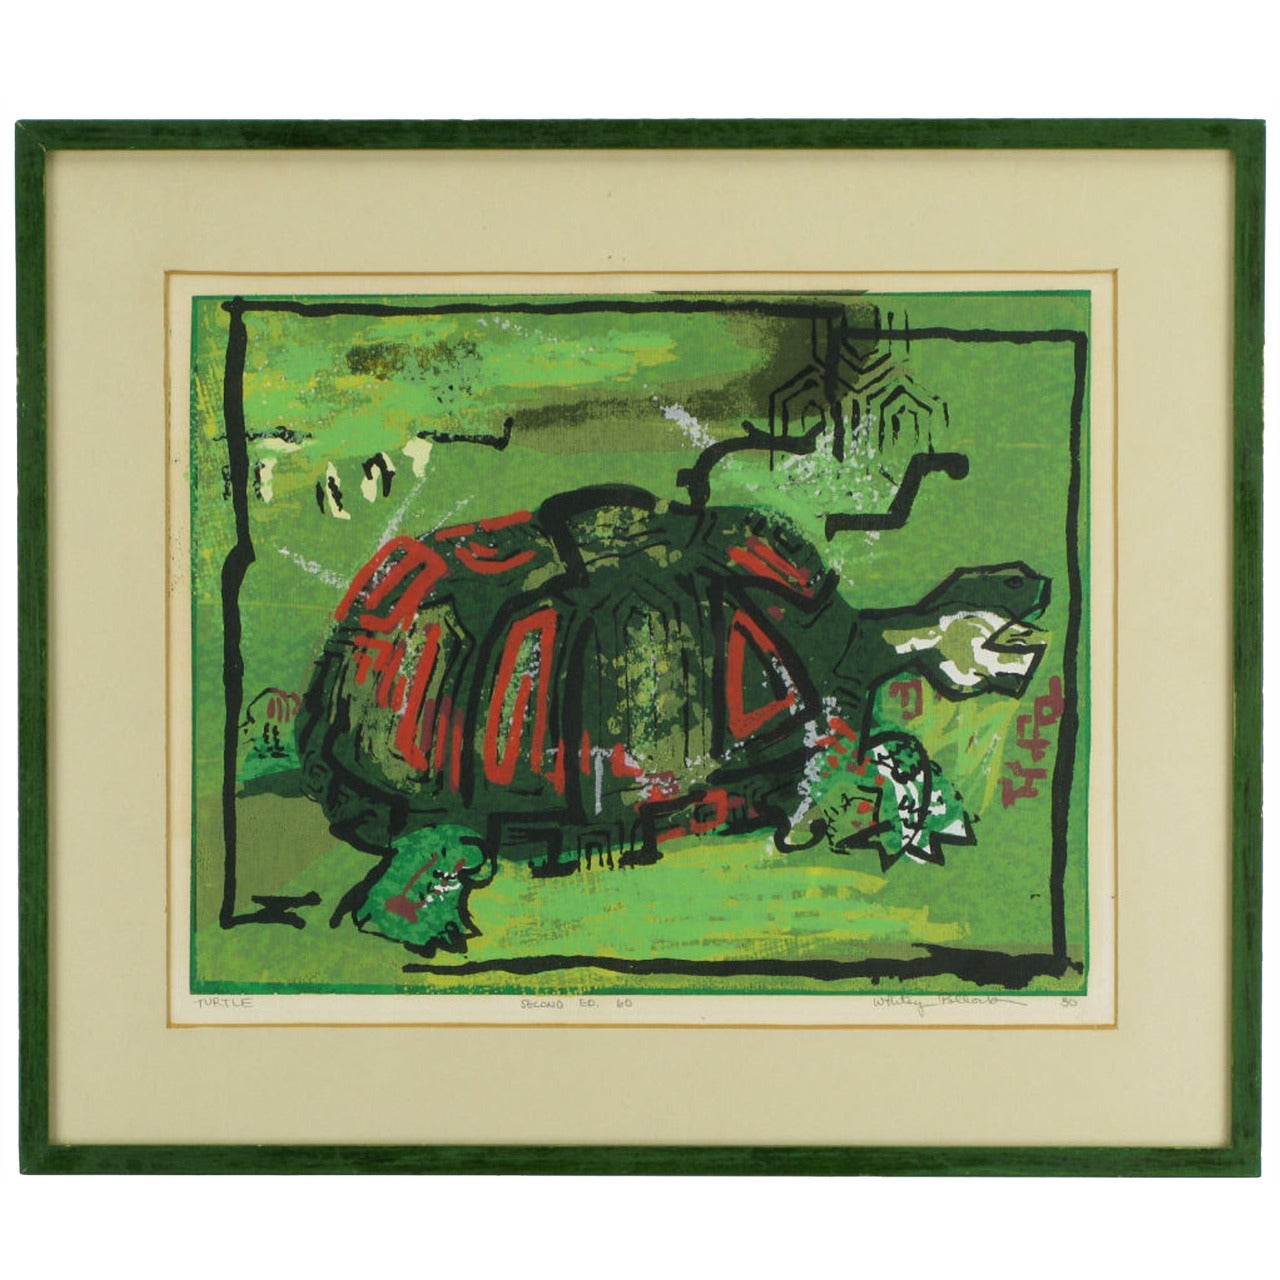 Colorful Turtle Block Print In Green, Red, Black & White